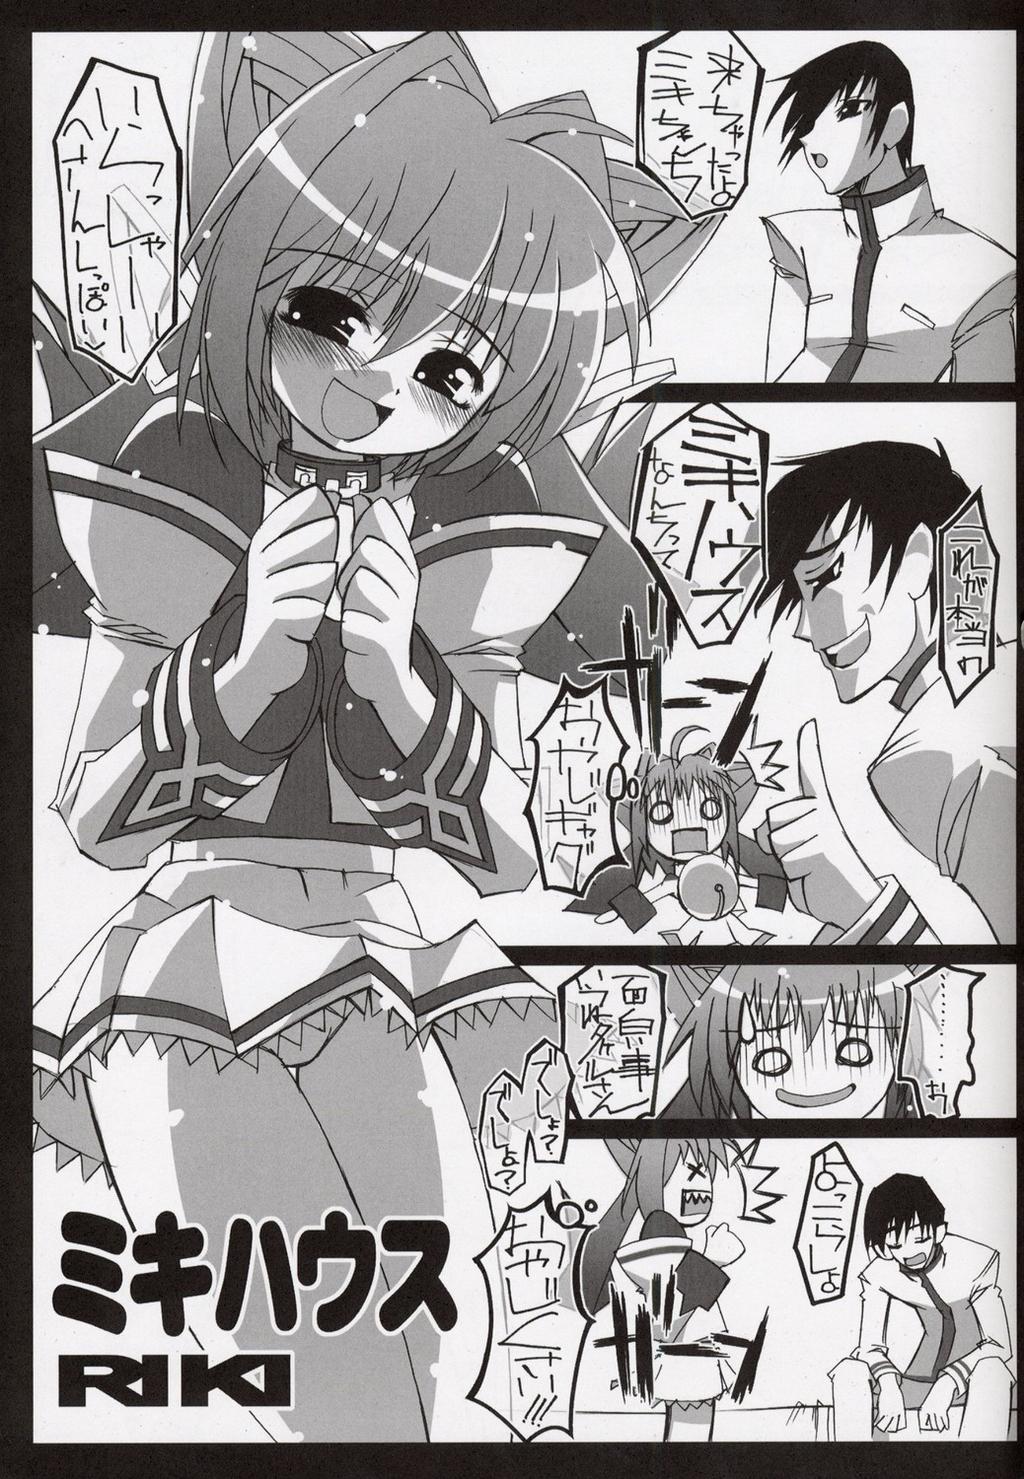 Classic MIKI Prune - Muv-luv Piercing - Page 4